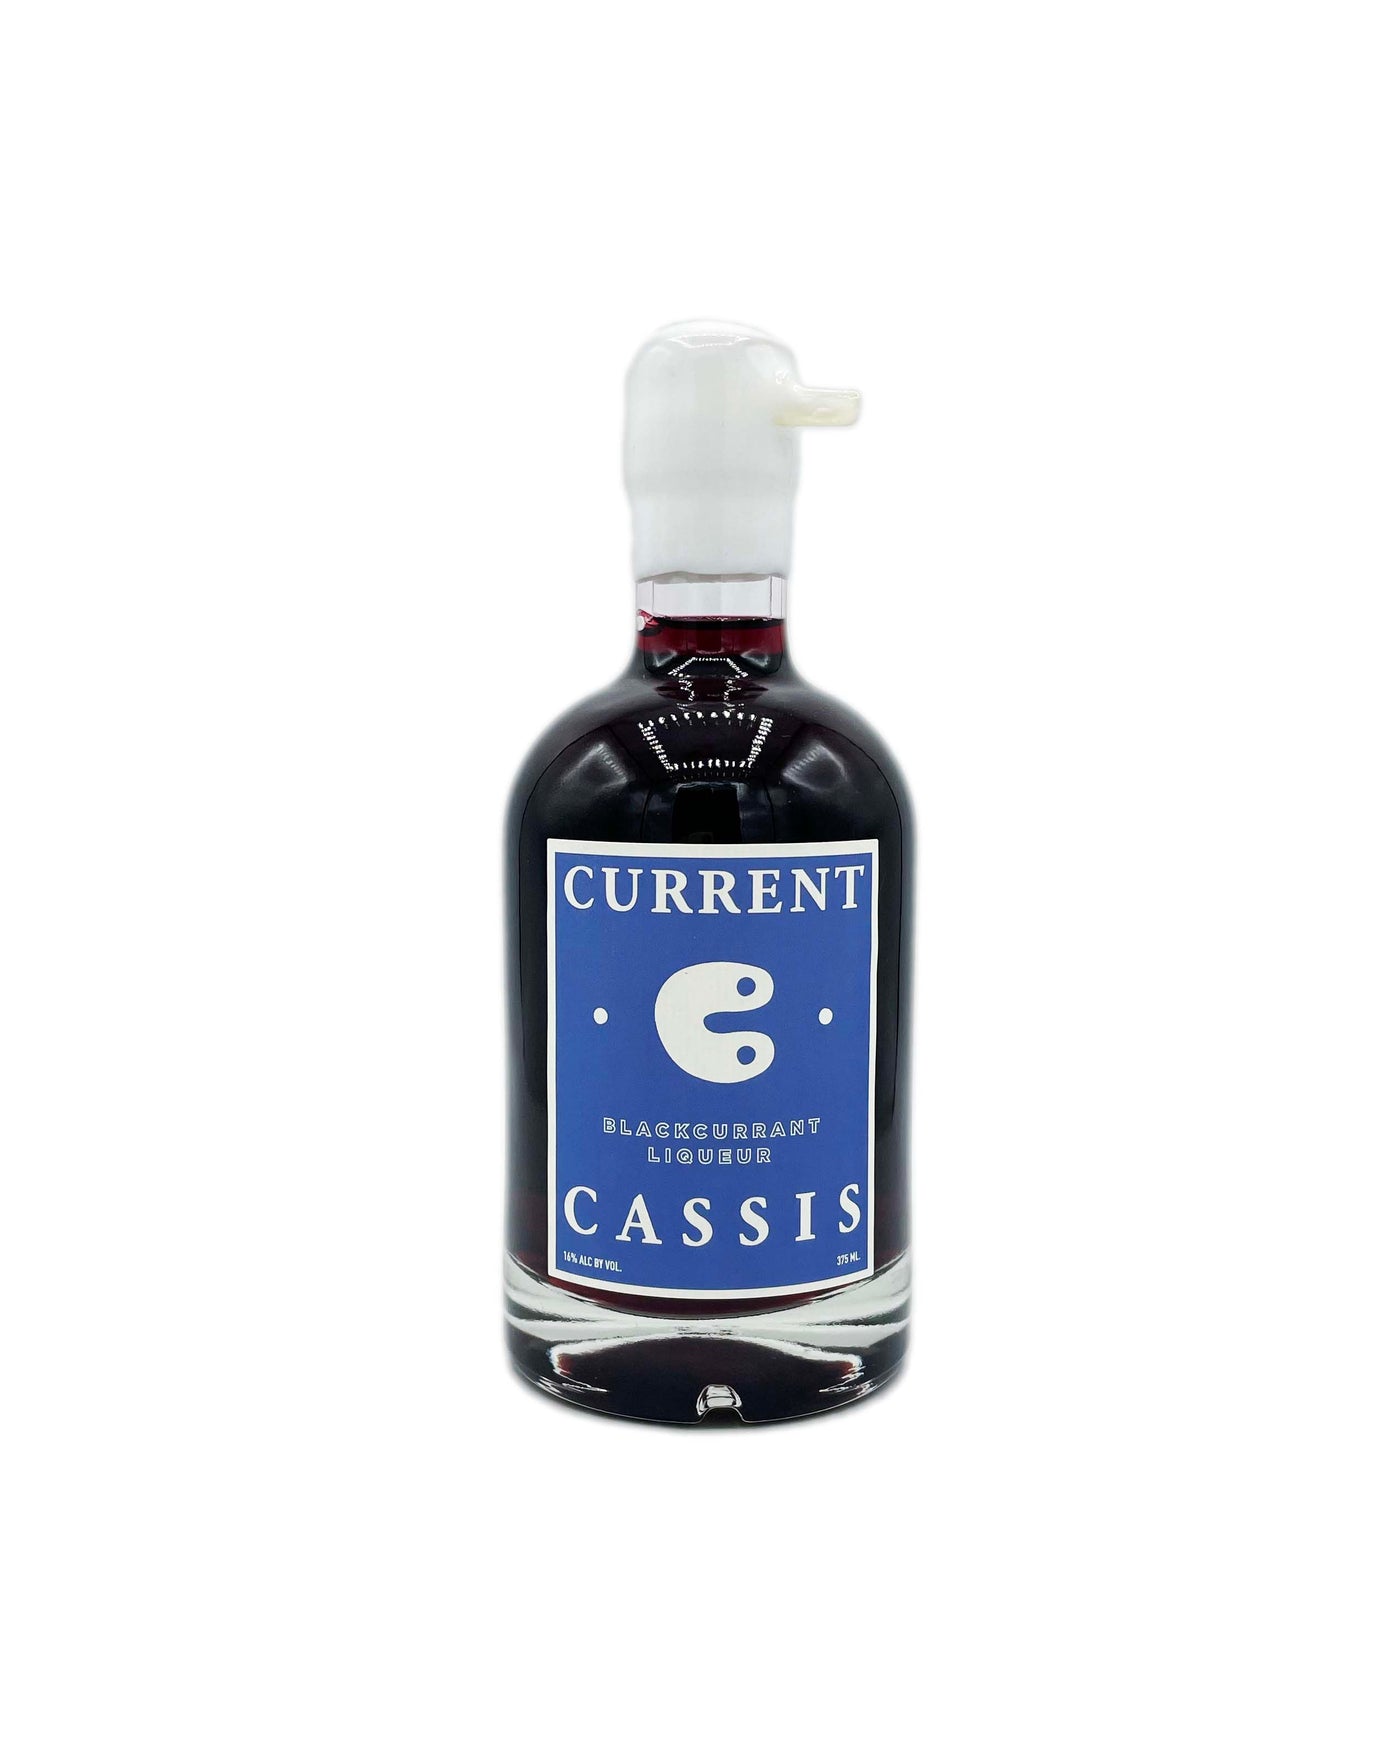 Current Cassis 375ml